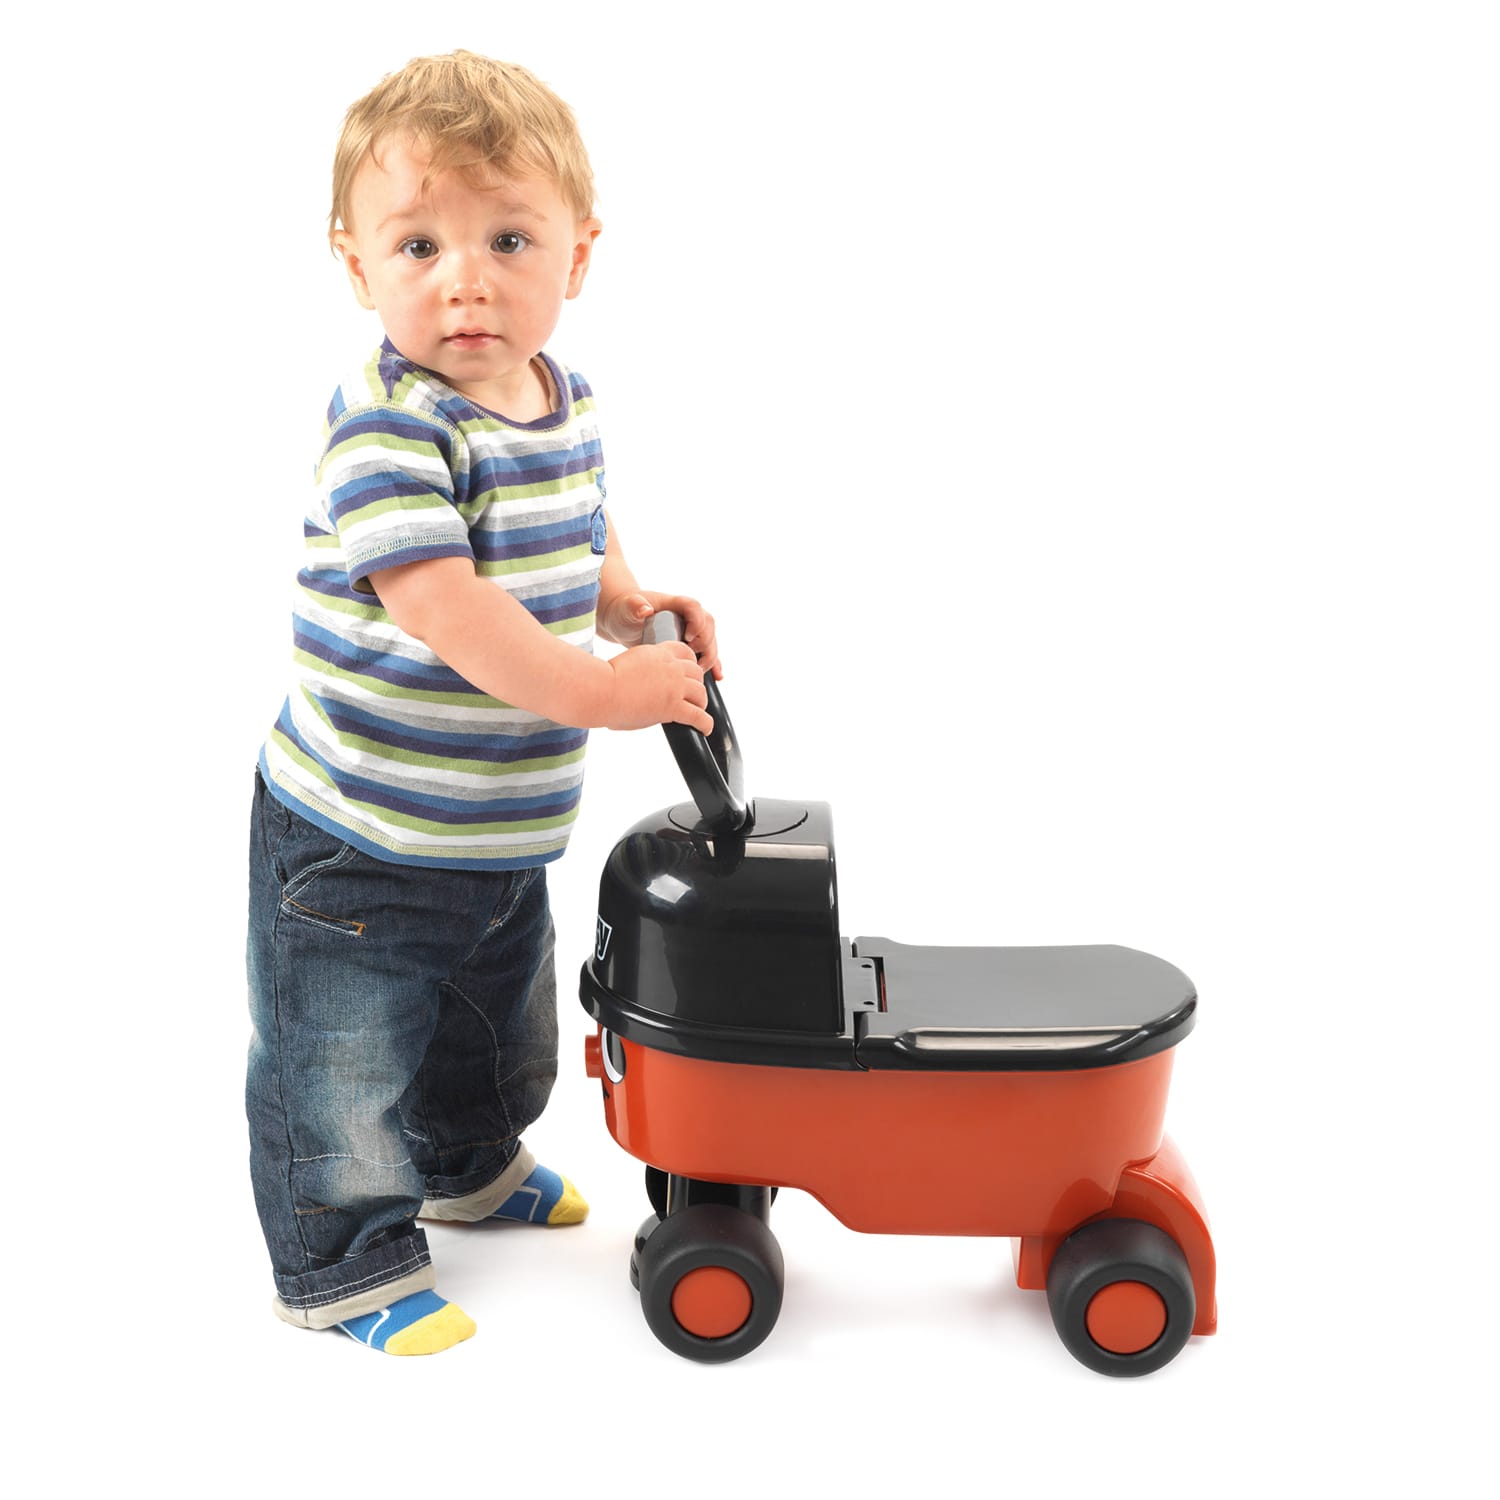 CASDON Little Driver Hetty Sit and Ride Plastic Toy 